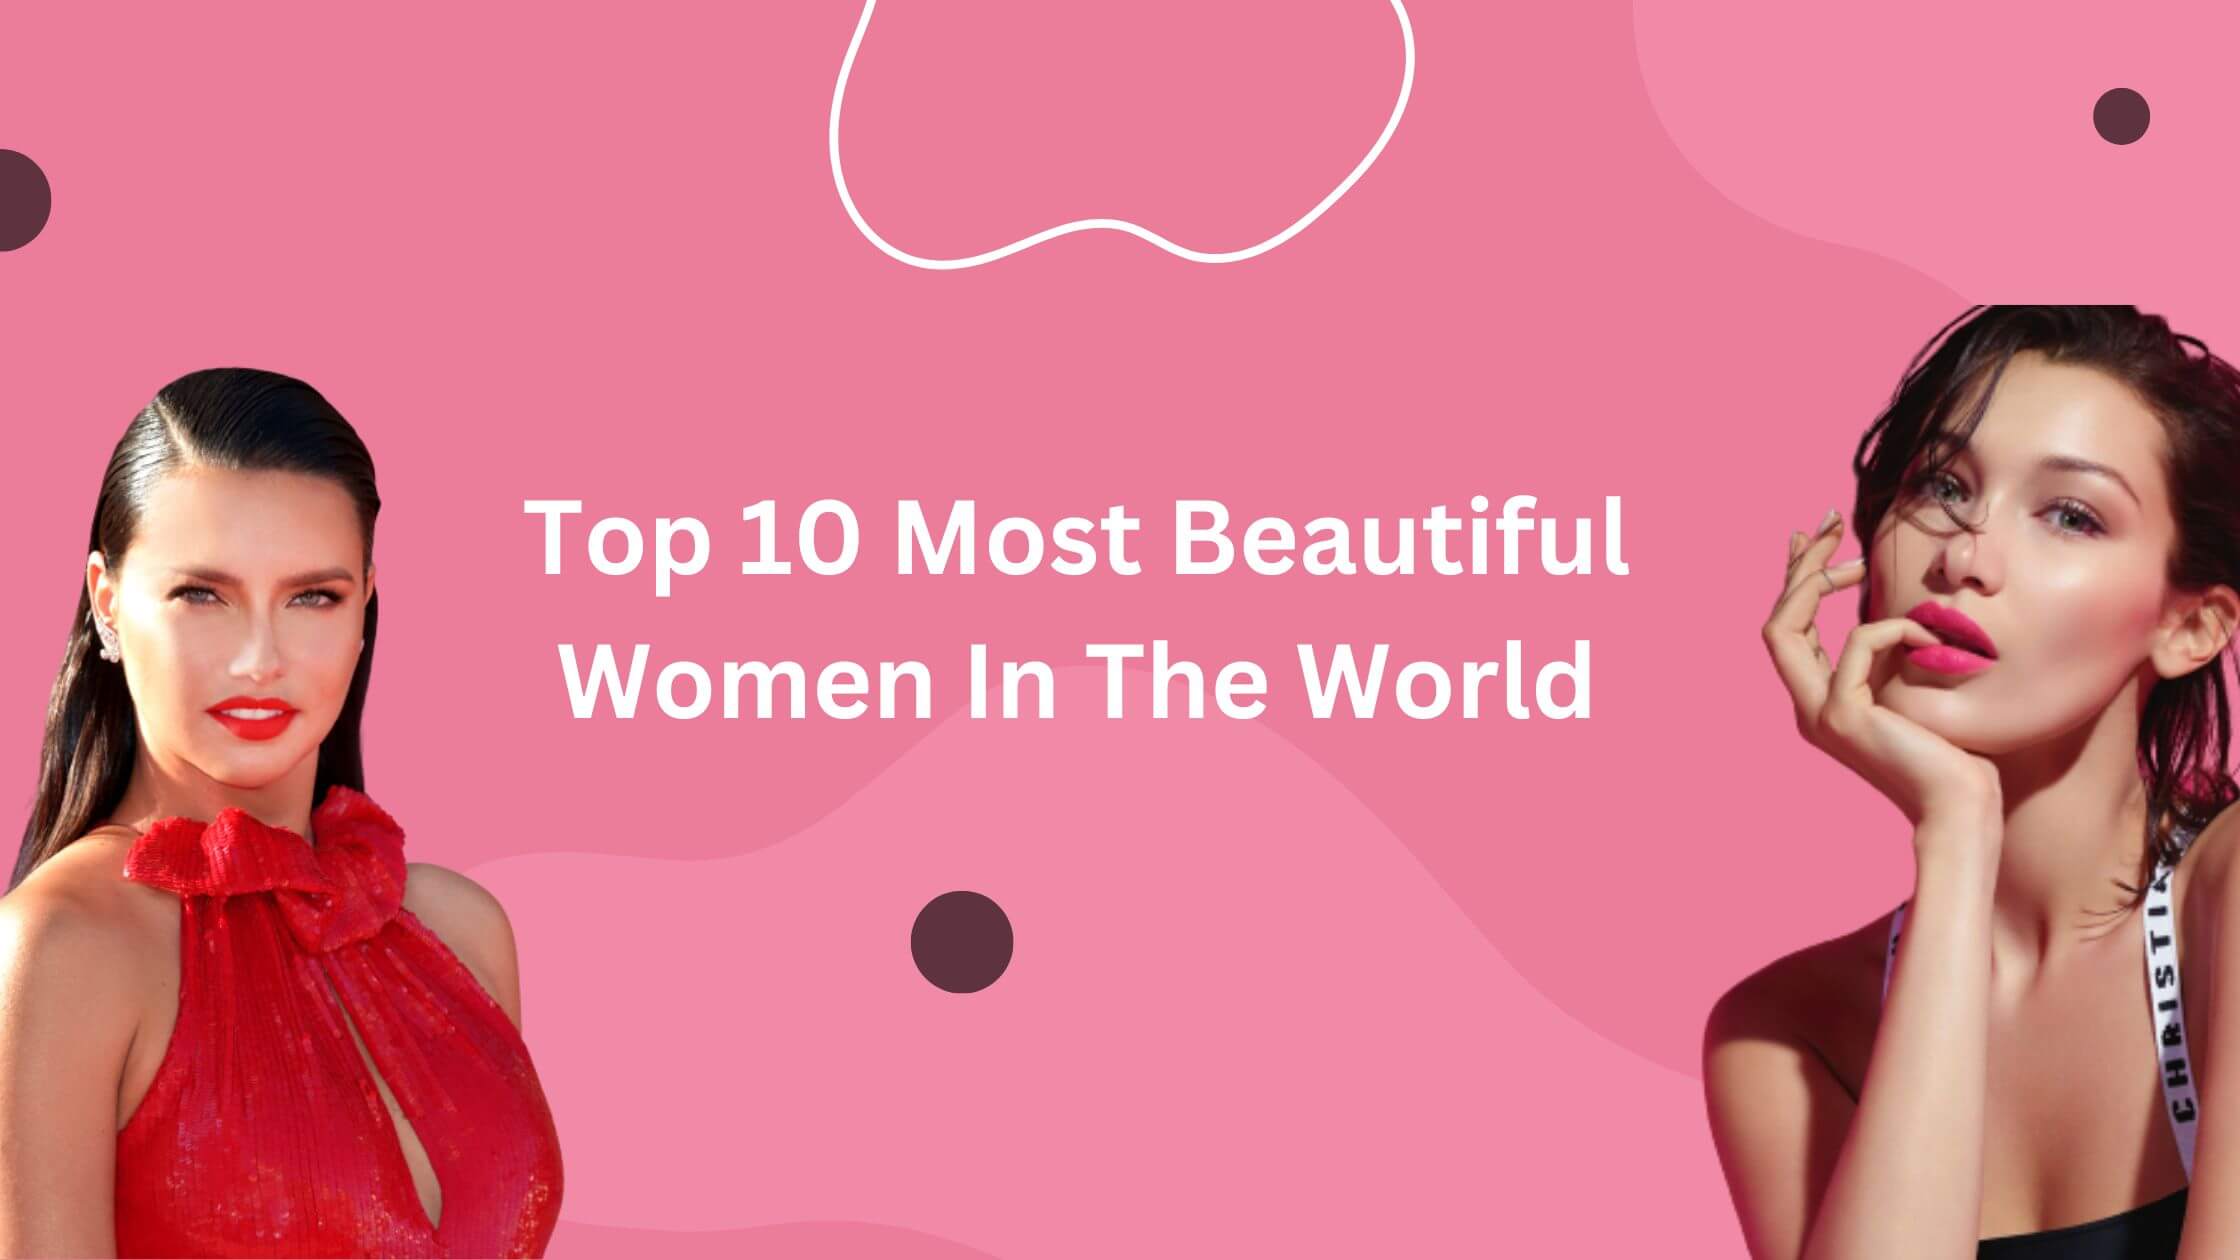 Top 10 Most Beautiful Women In The World